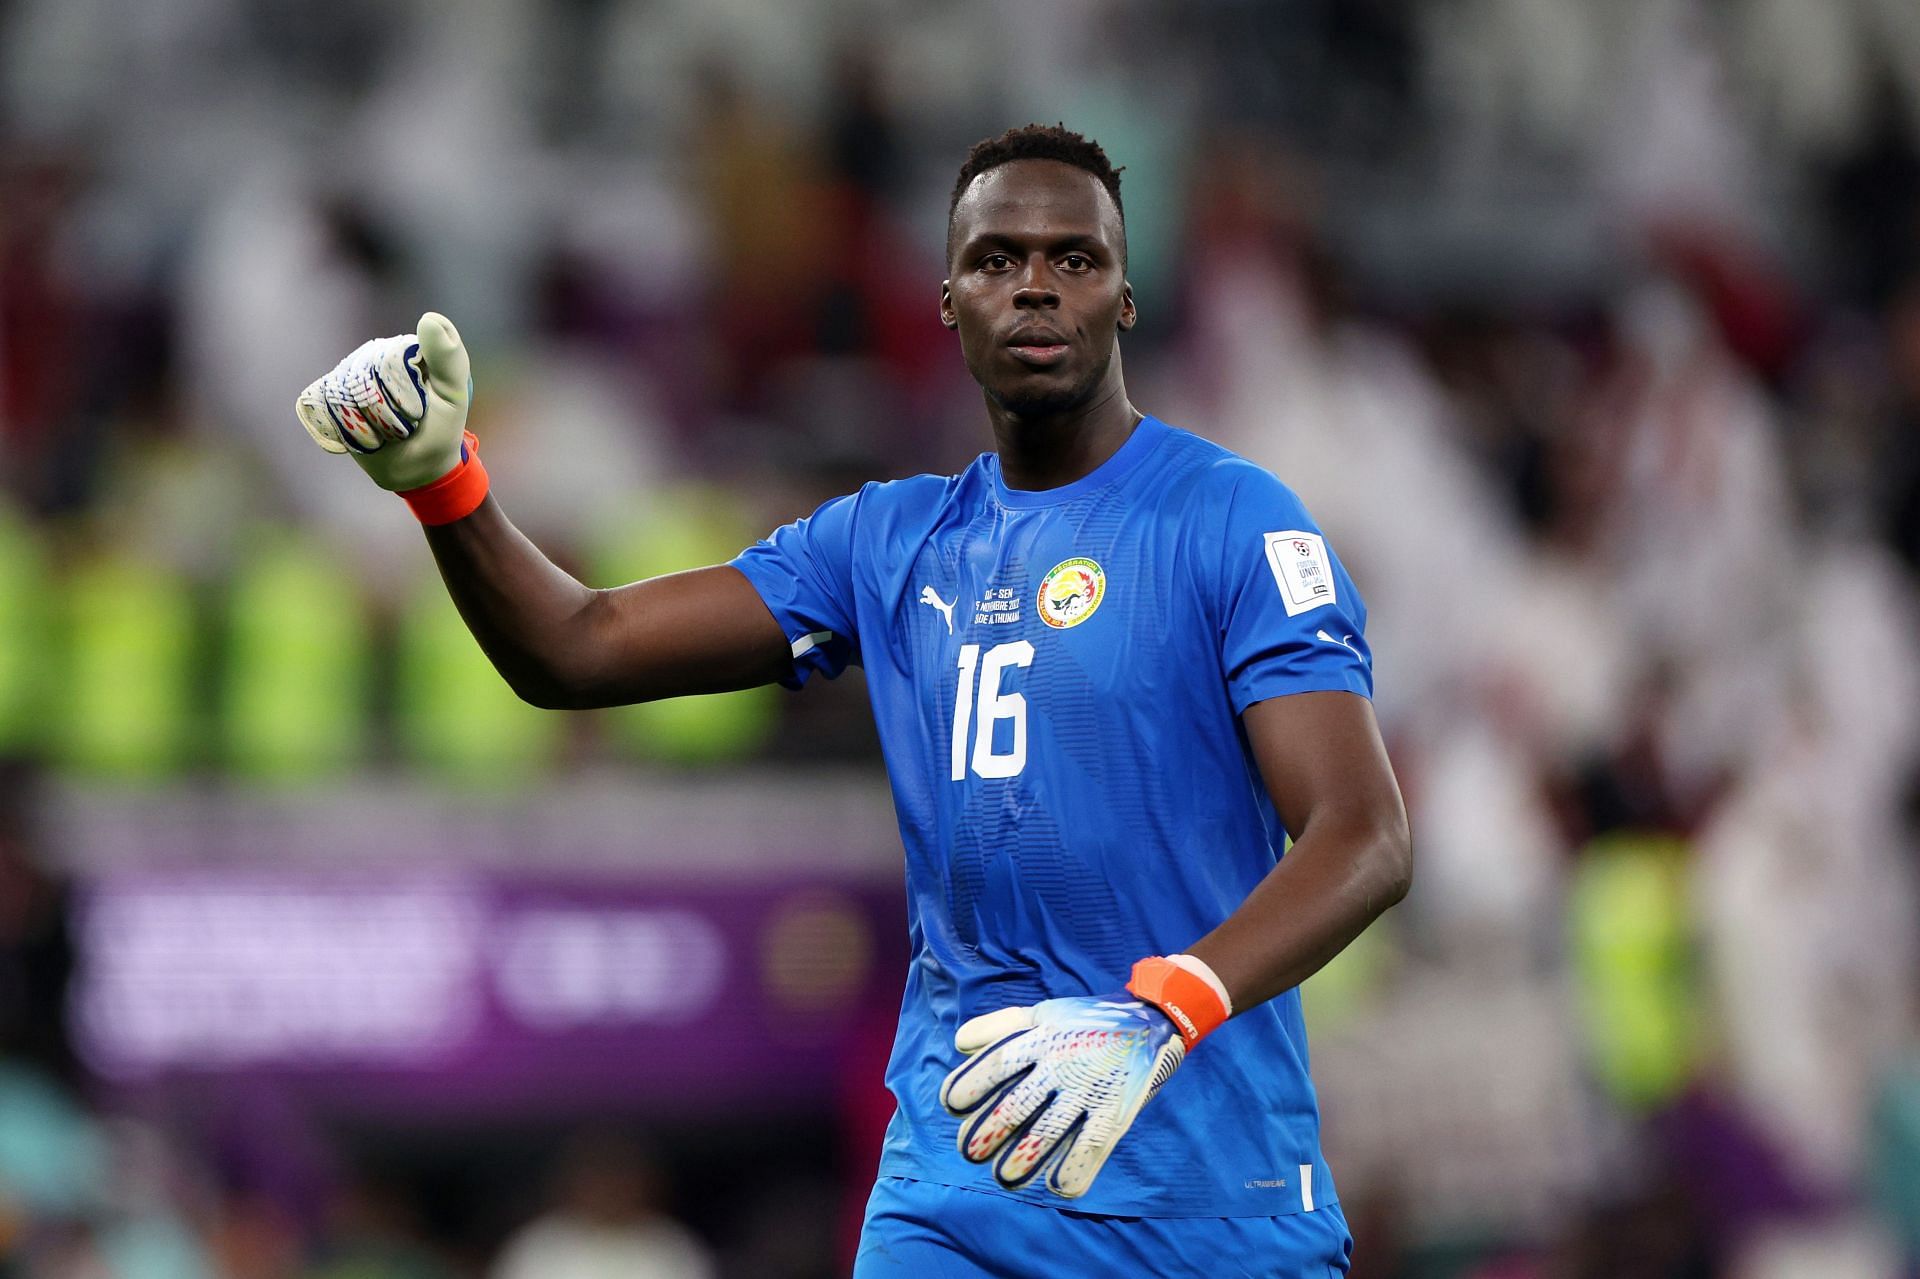 Edouard Mendy put up a strong display against Qatar.